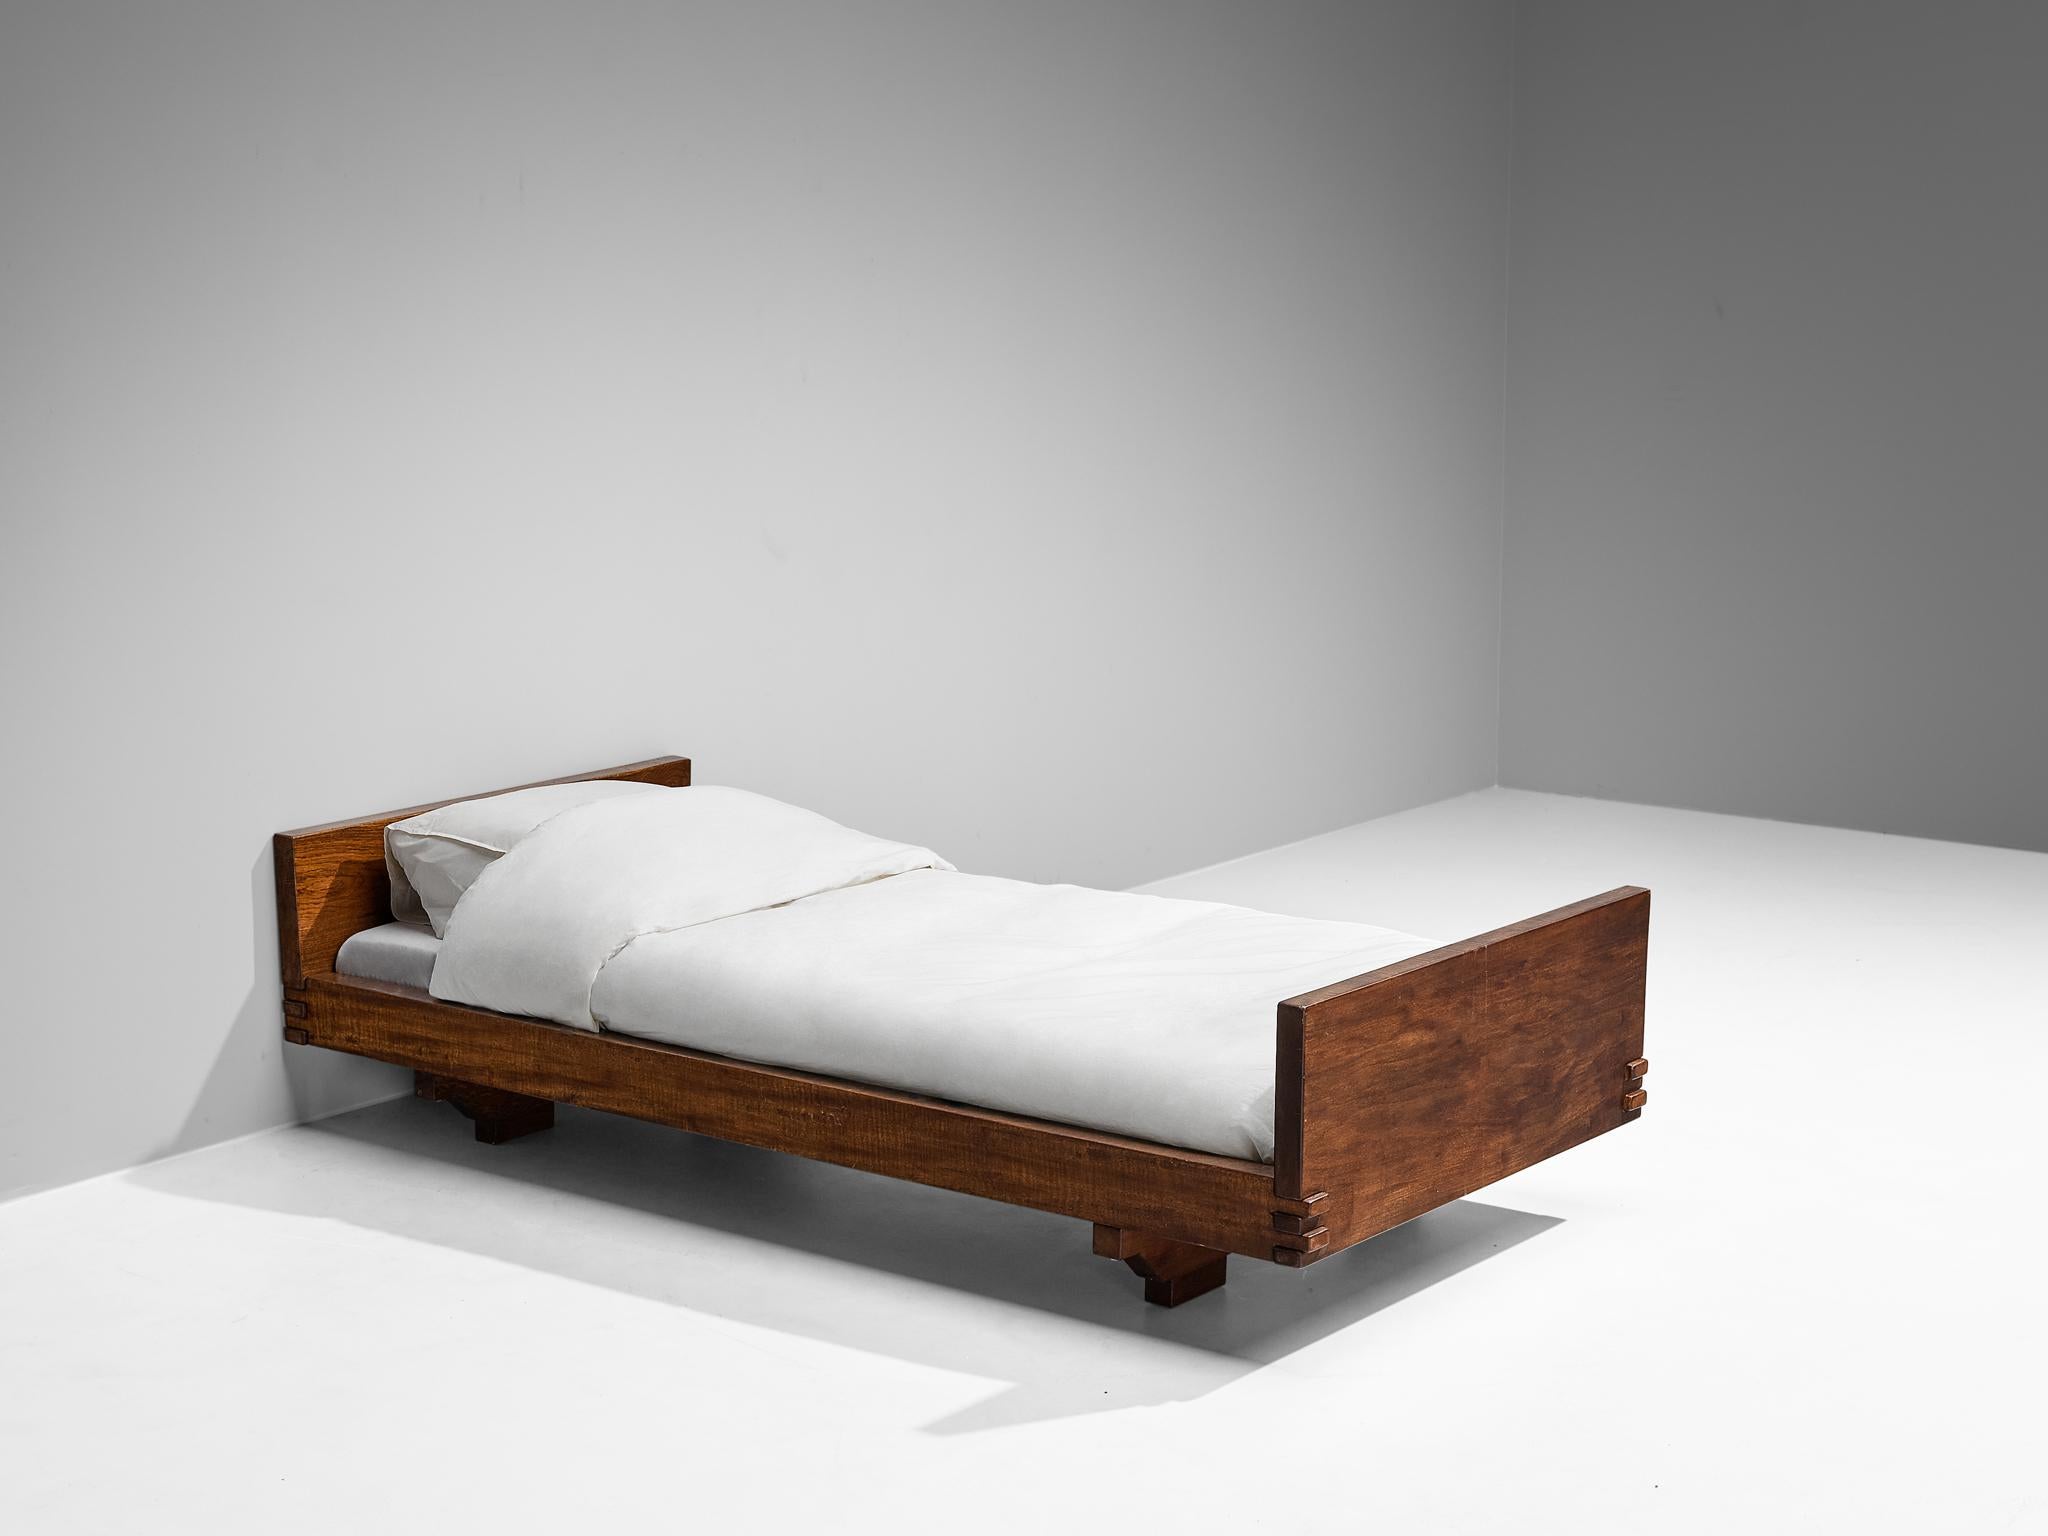 Late 20th Century Giuseppe Rivadossi for Officina Rivadossi Single Beds in Walnut and Oak  For Sale